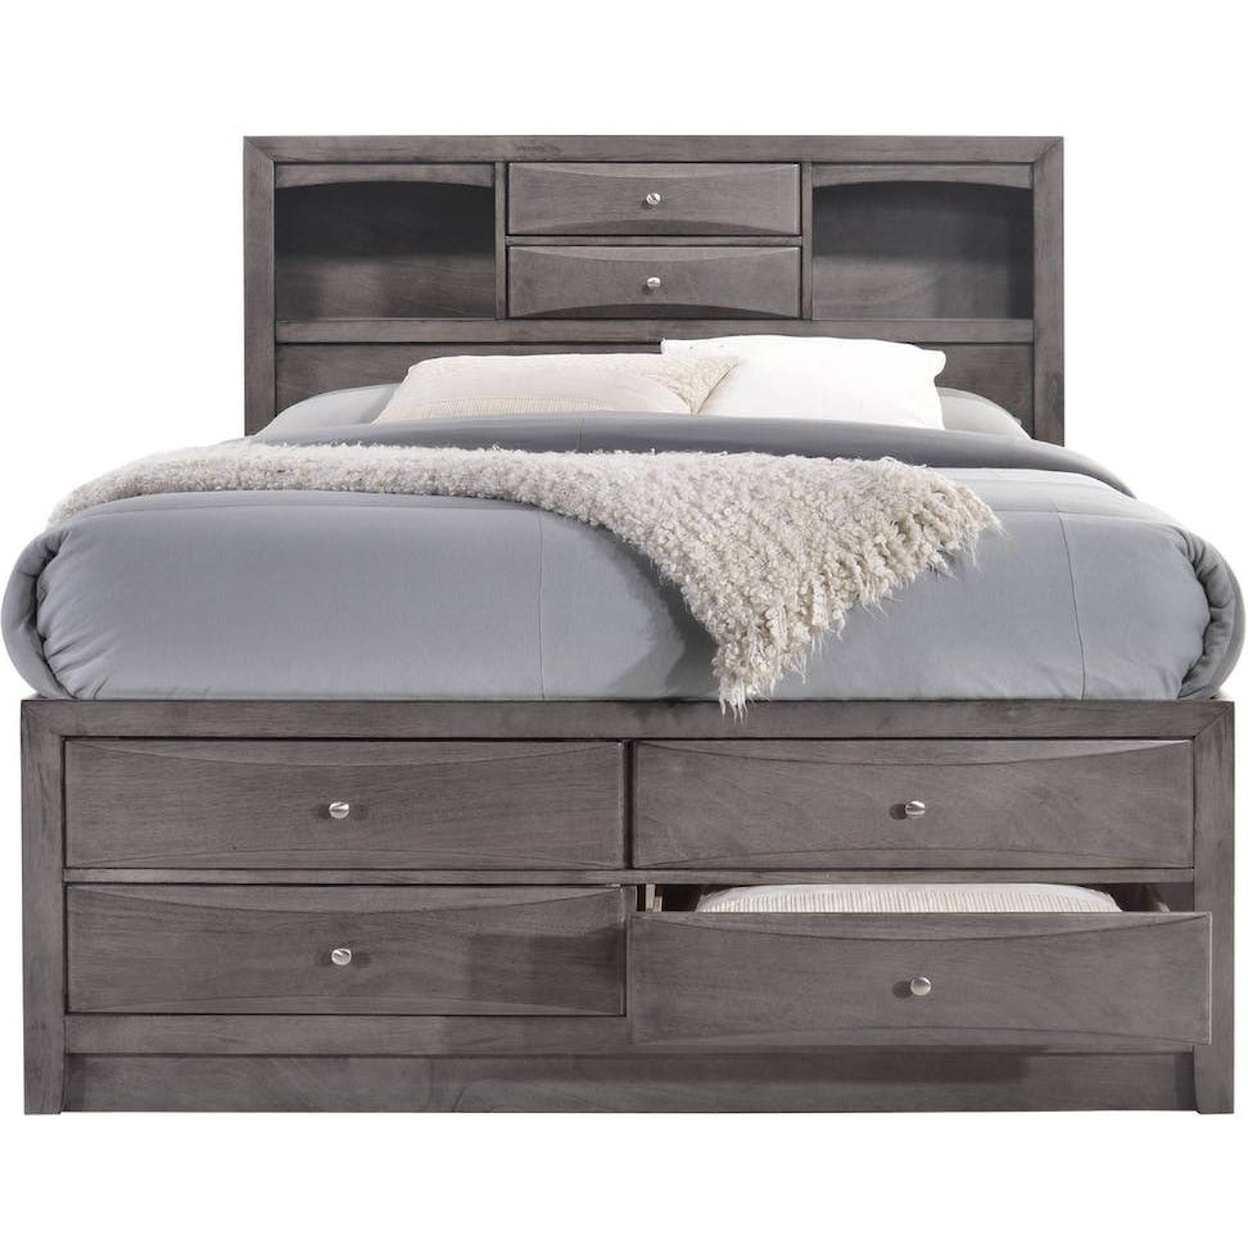 Elements Emily Twin Storage Bedroom Group